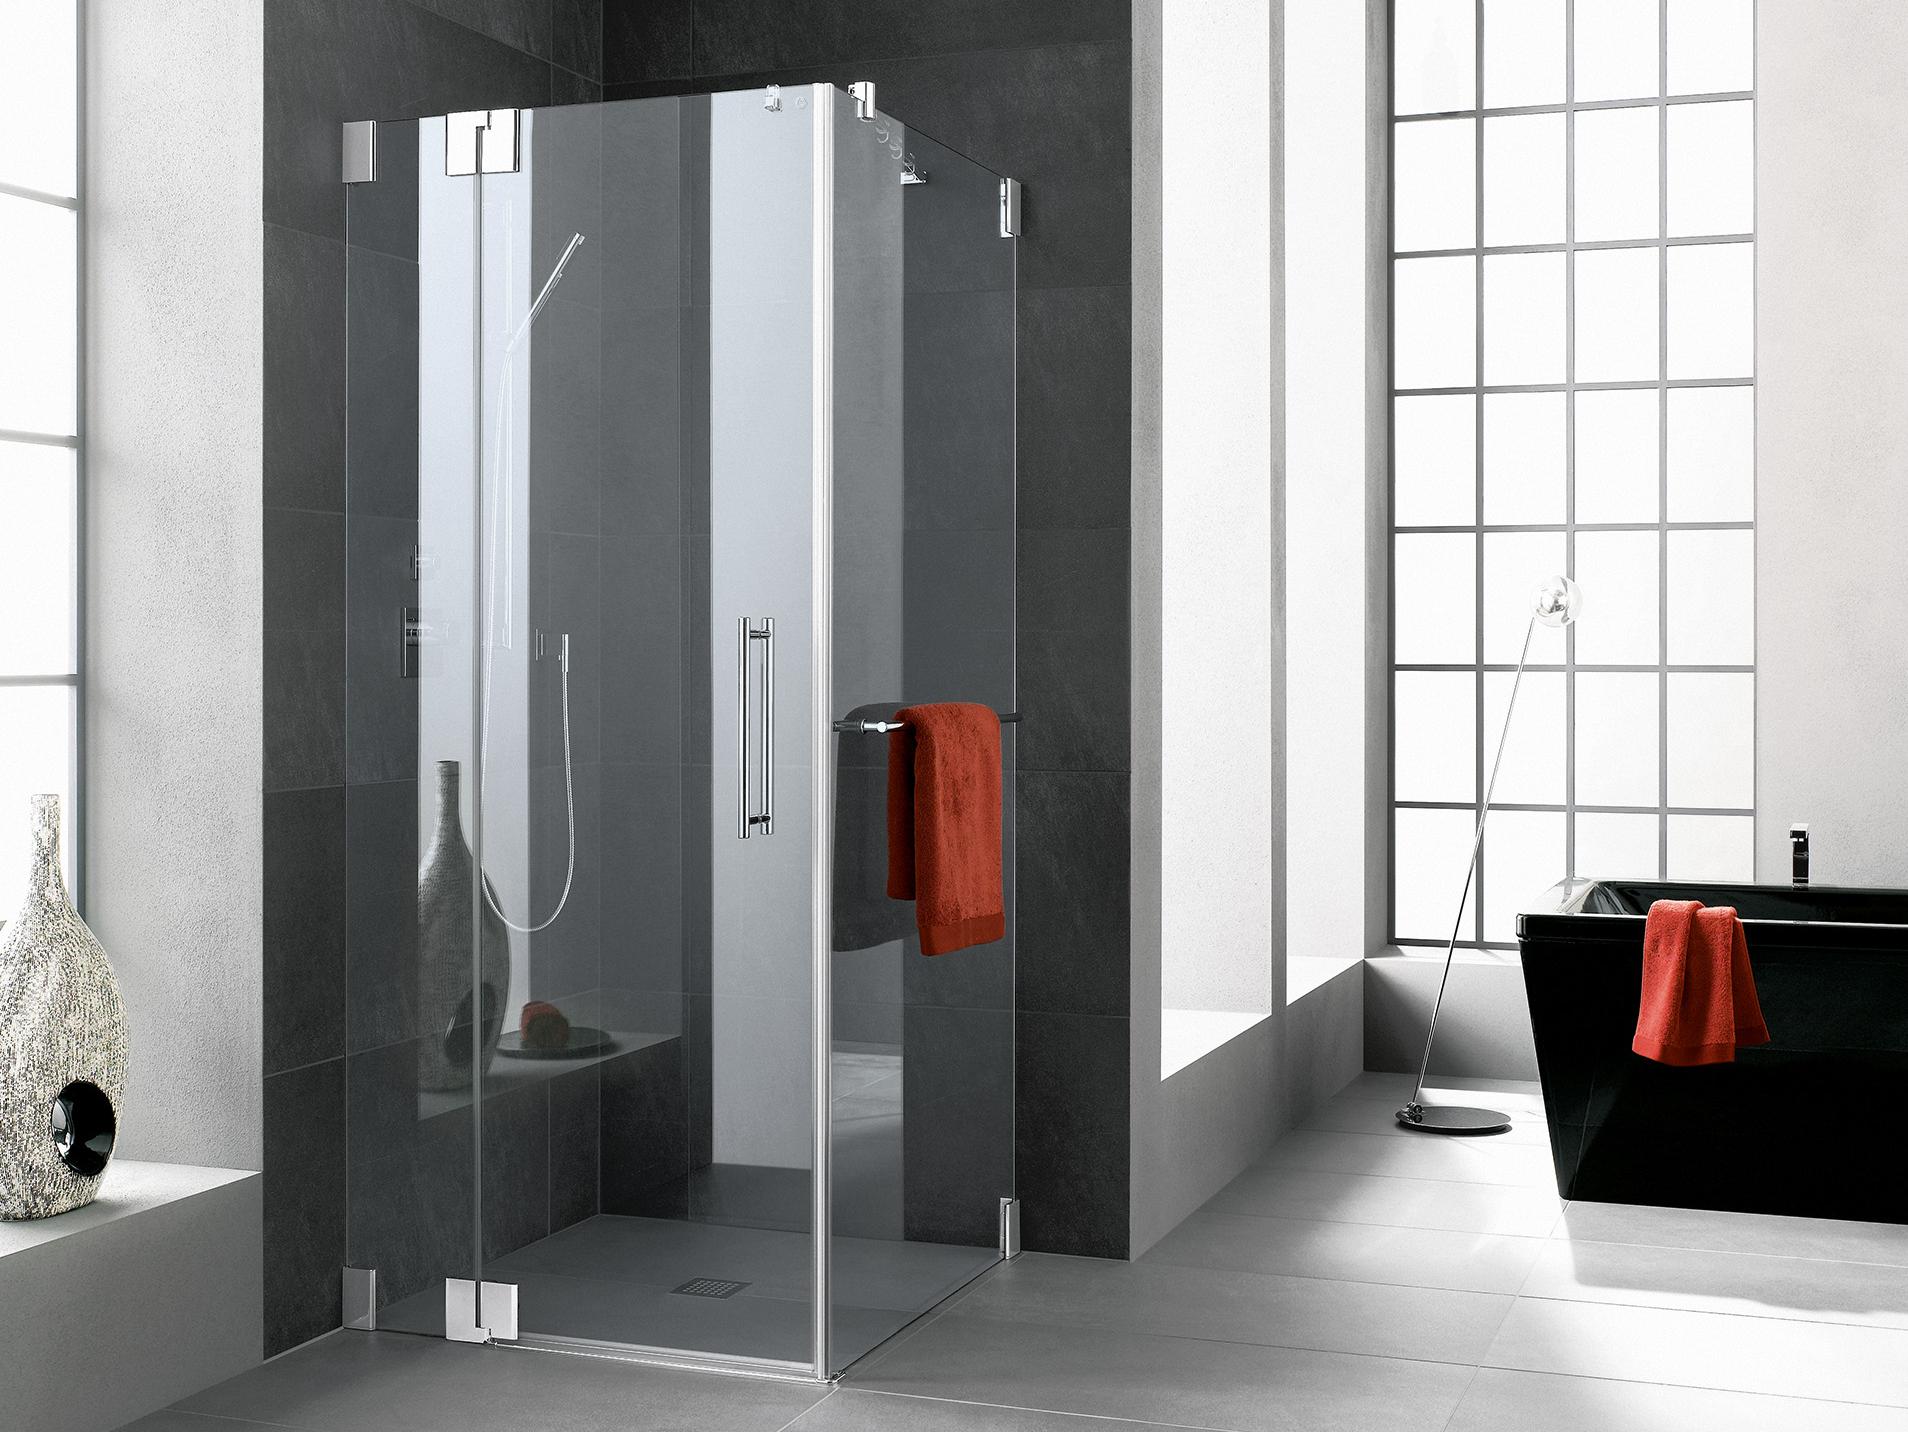 Kermi hinged shower enclosure, PASA single panel hinged door with fixed panel and side wall